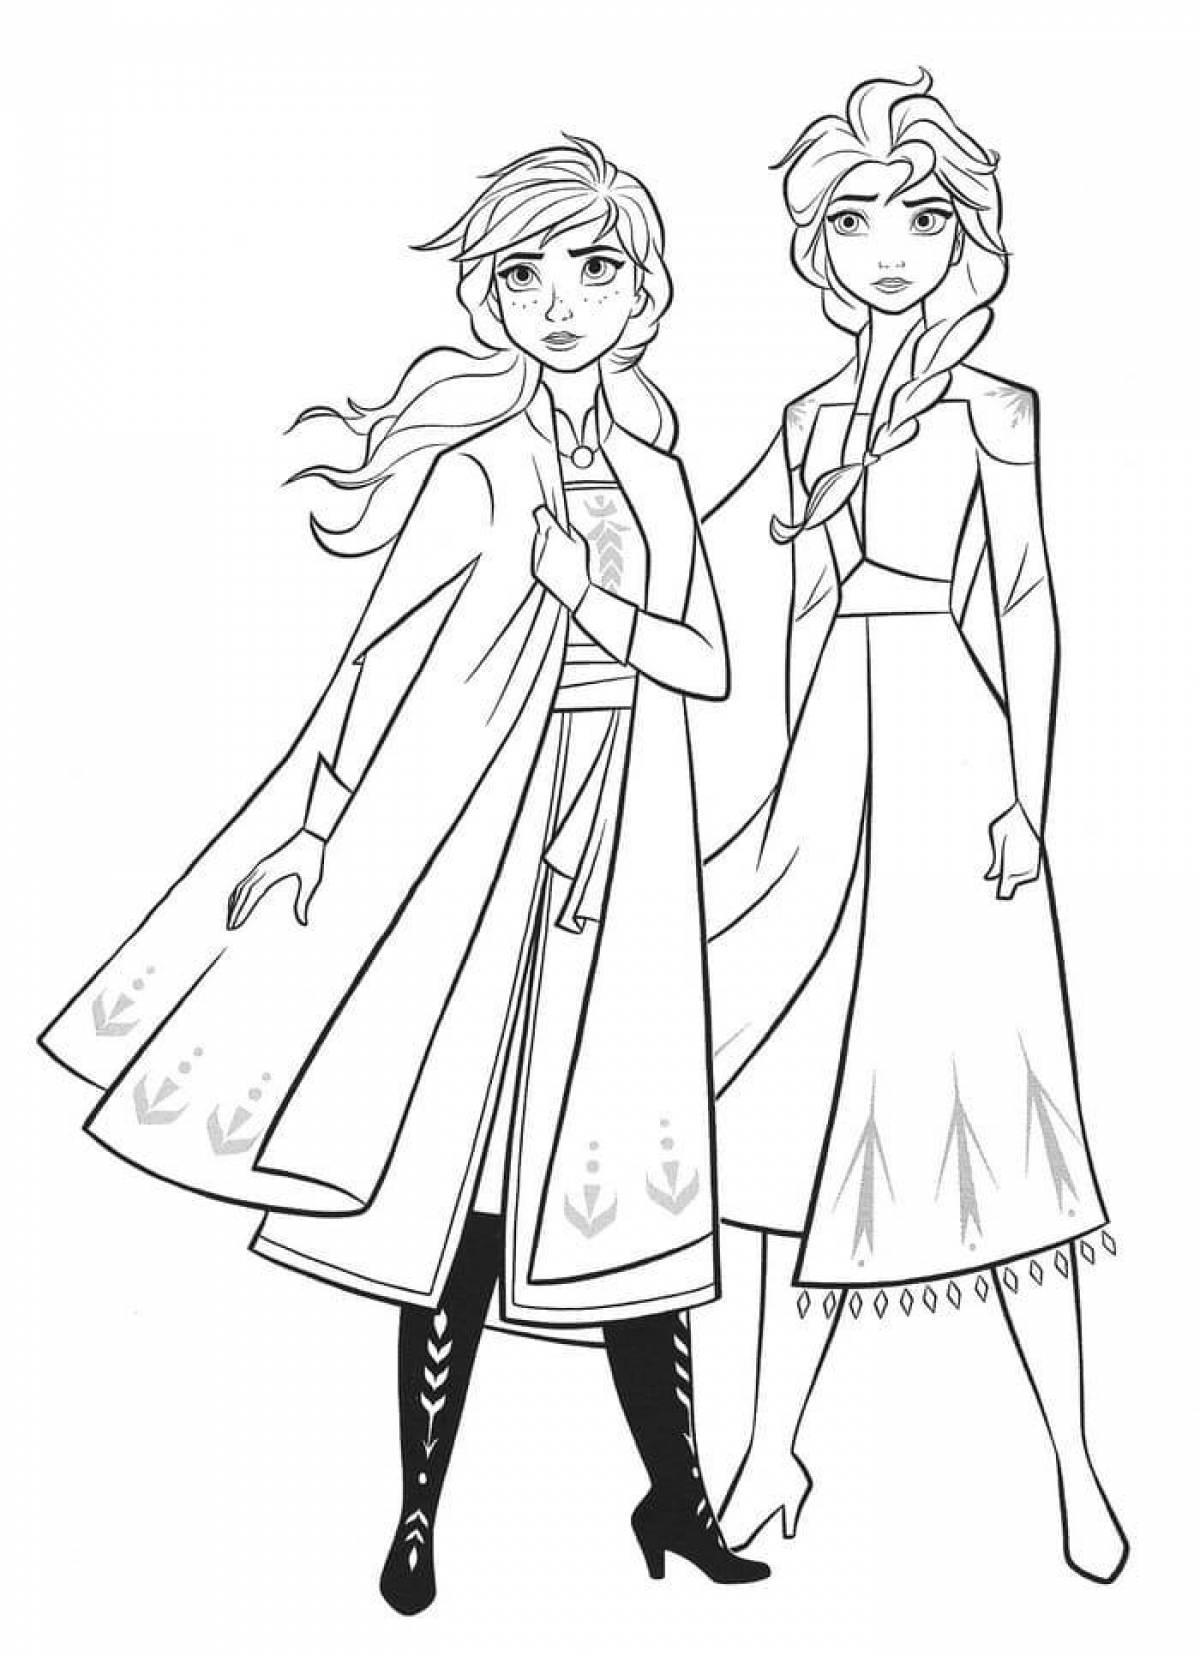 Elsa and anna frozen live coloring